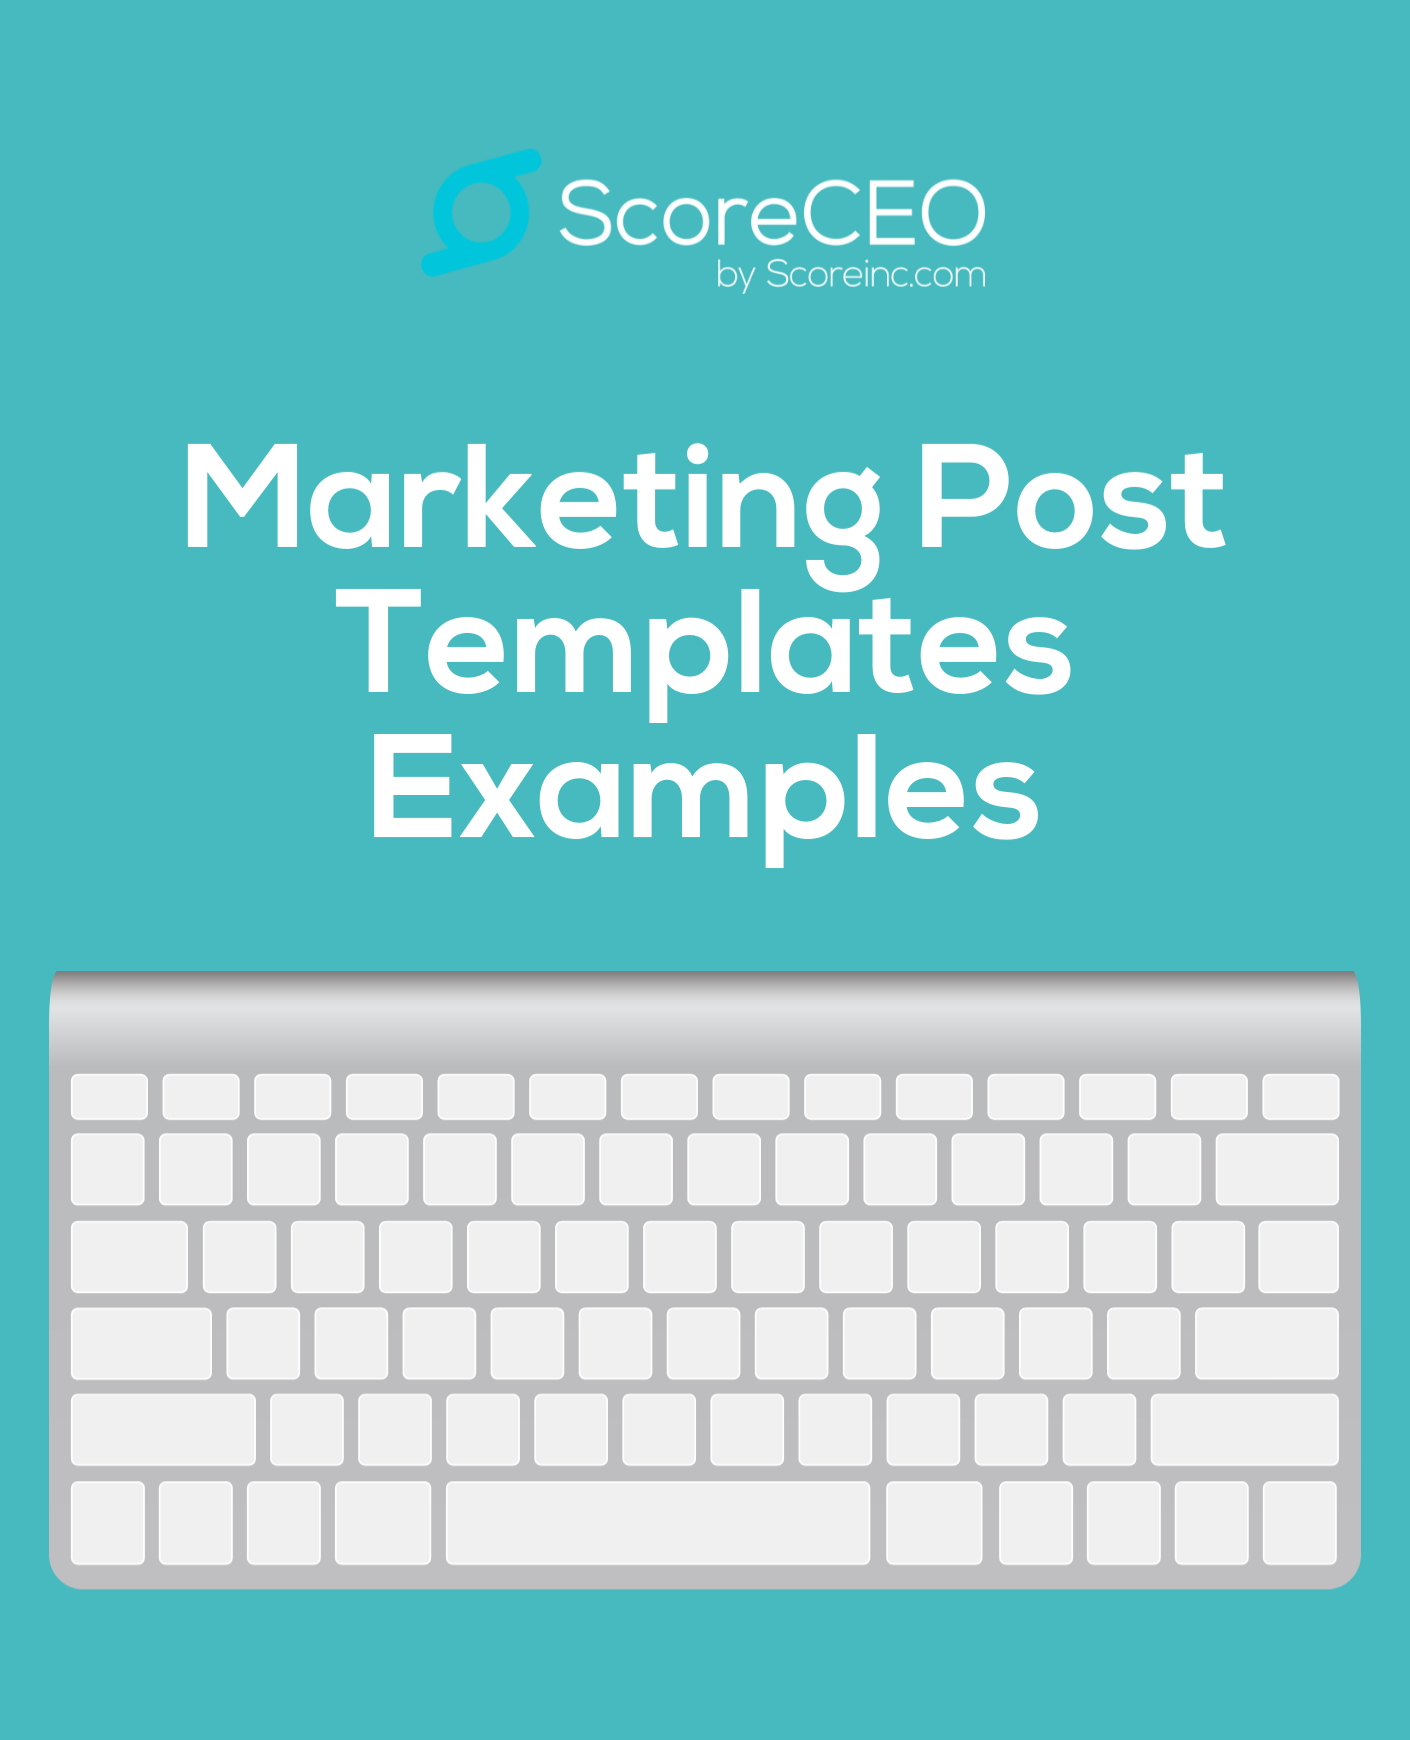 Marketing Post Templates Examples